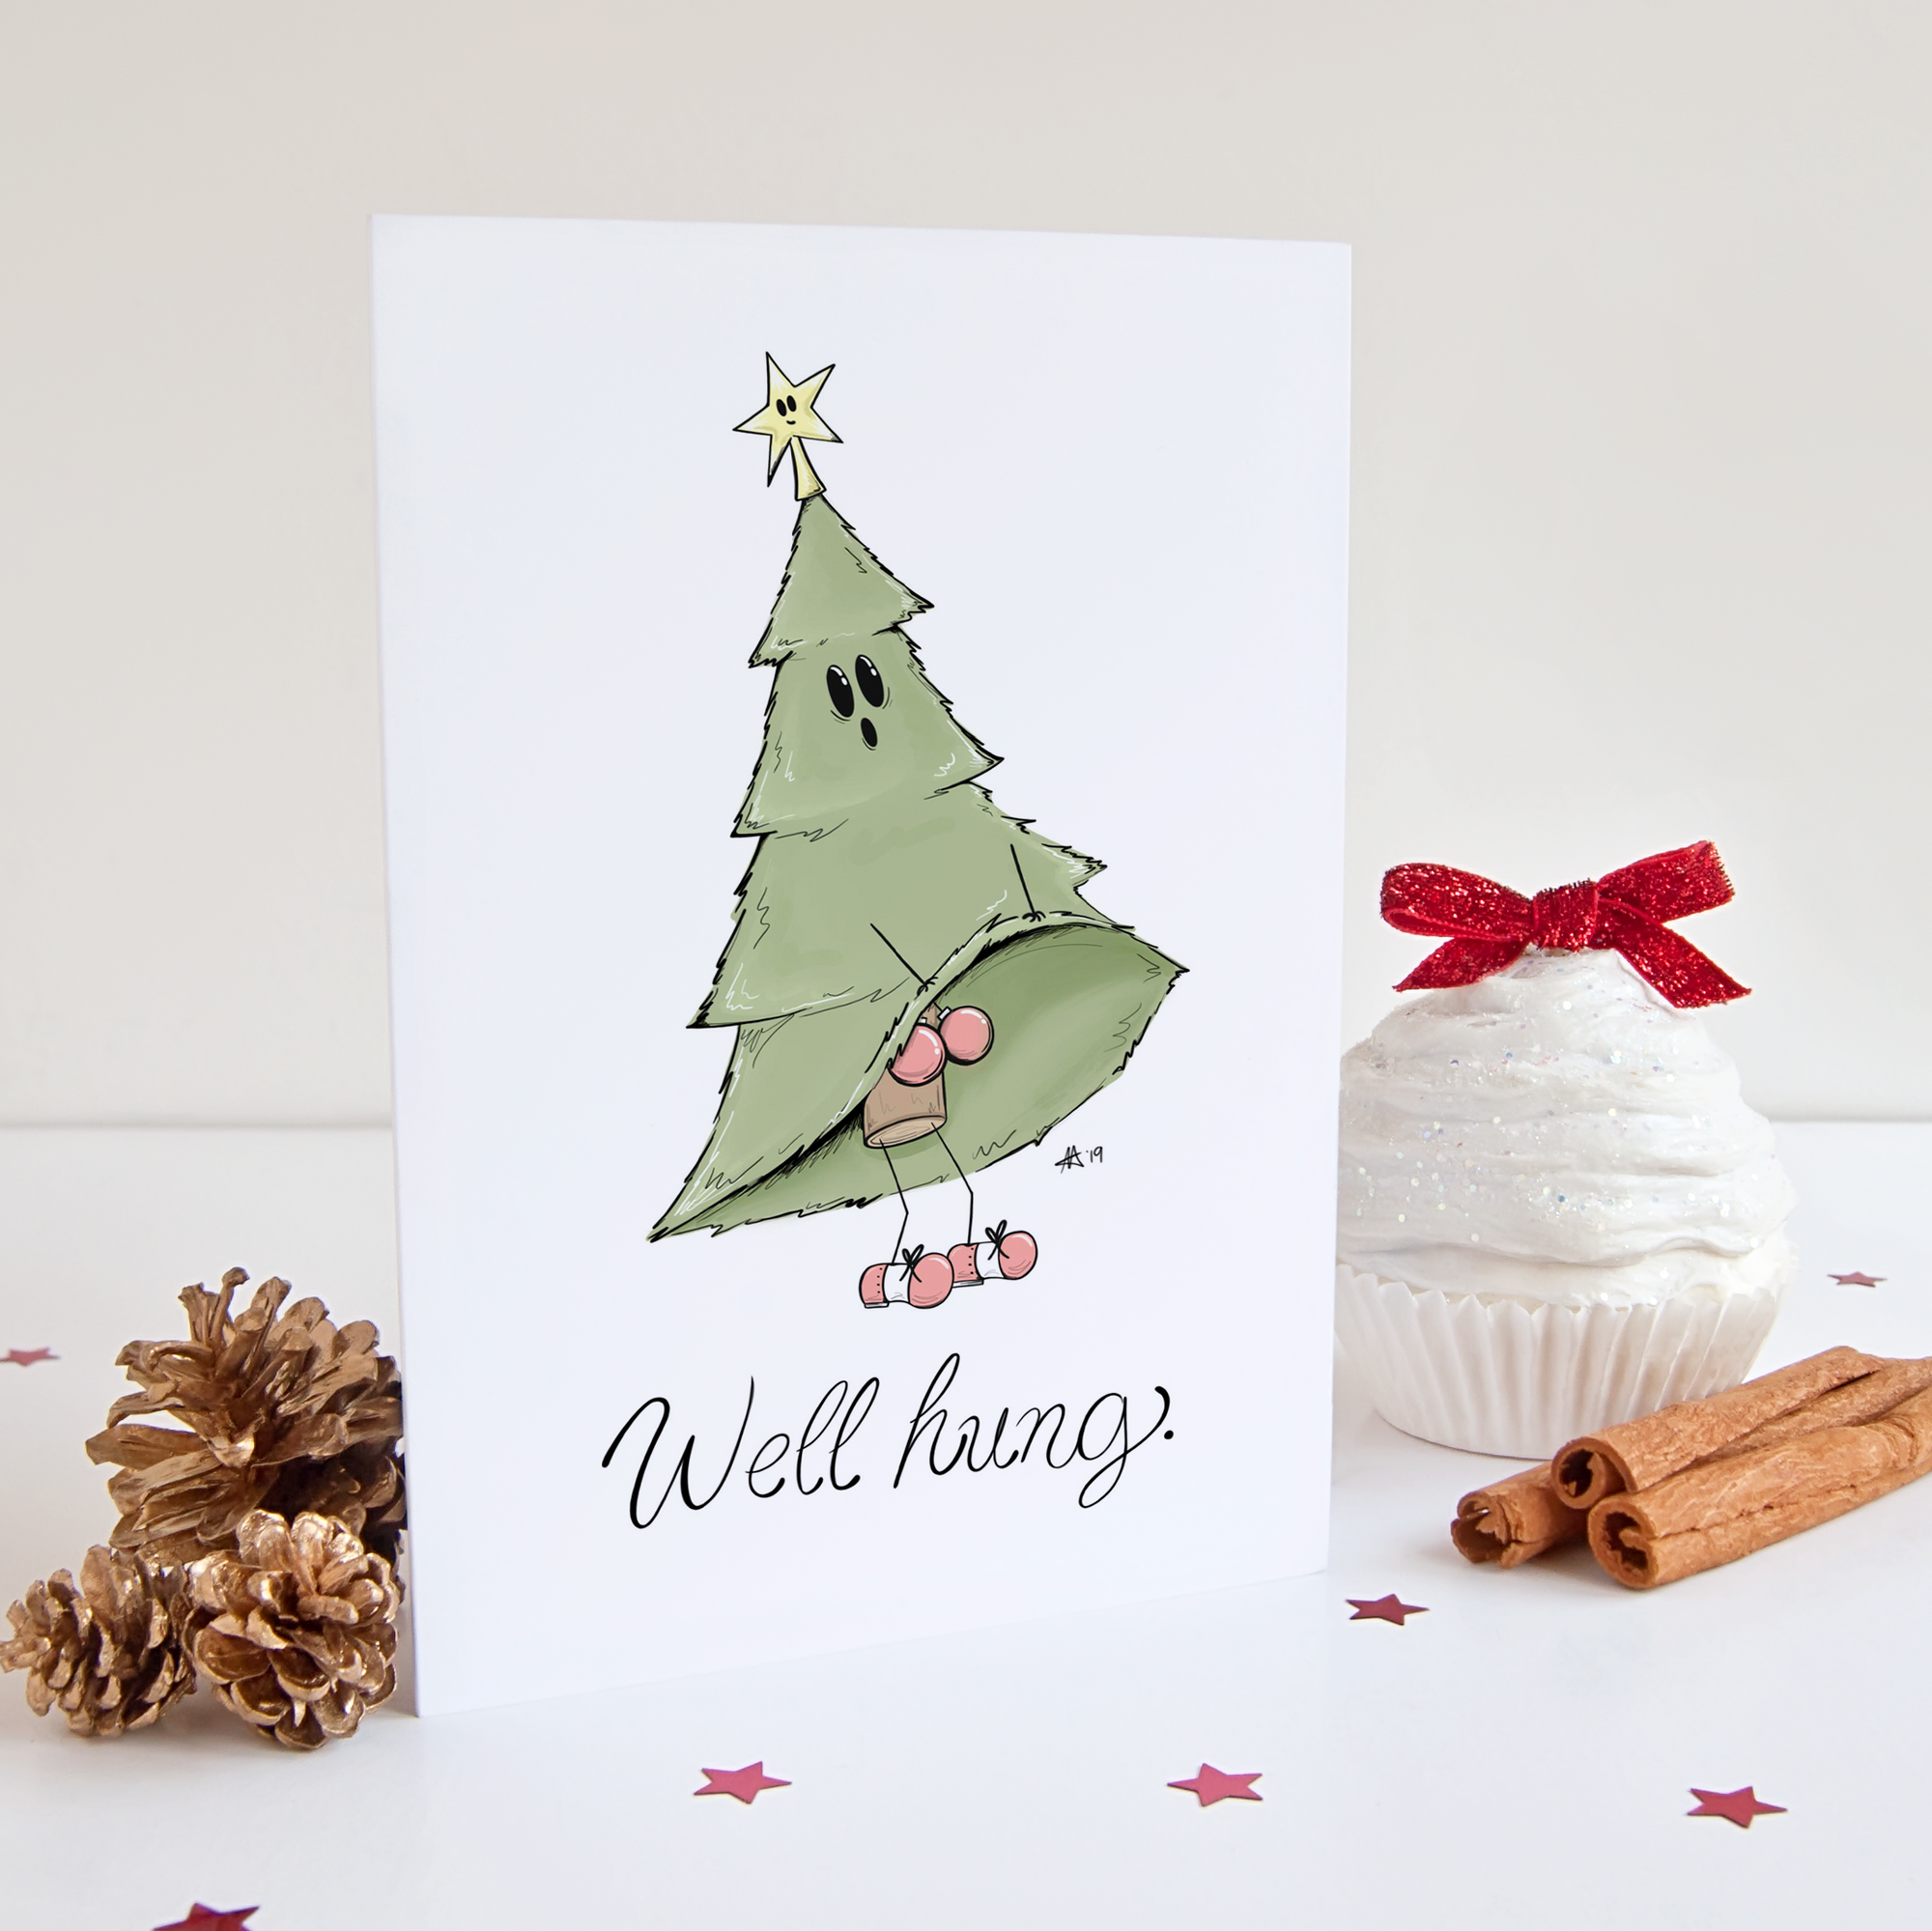 "Well hung." - Greeting Card / Small Print